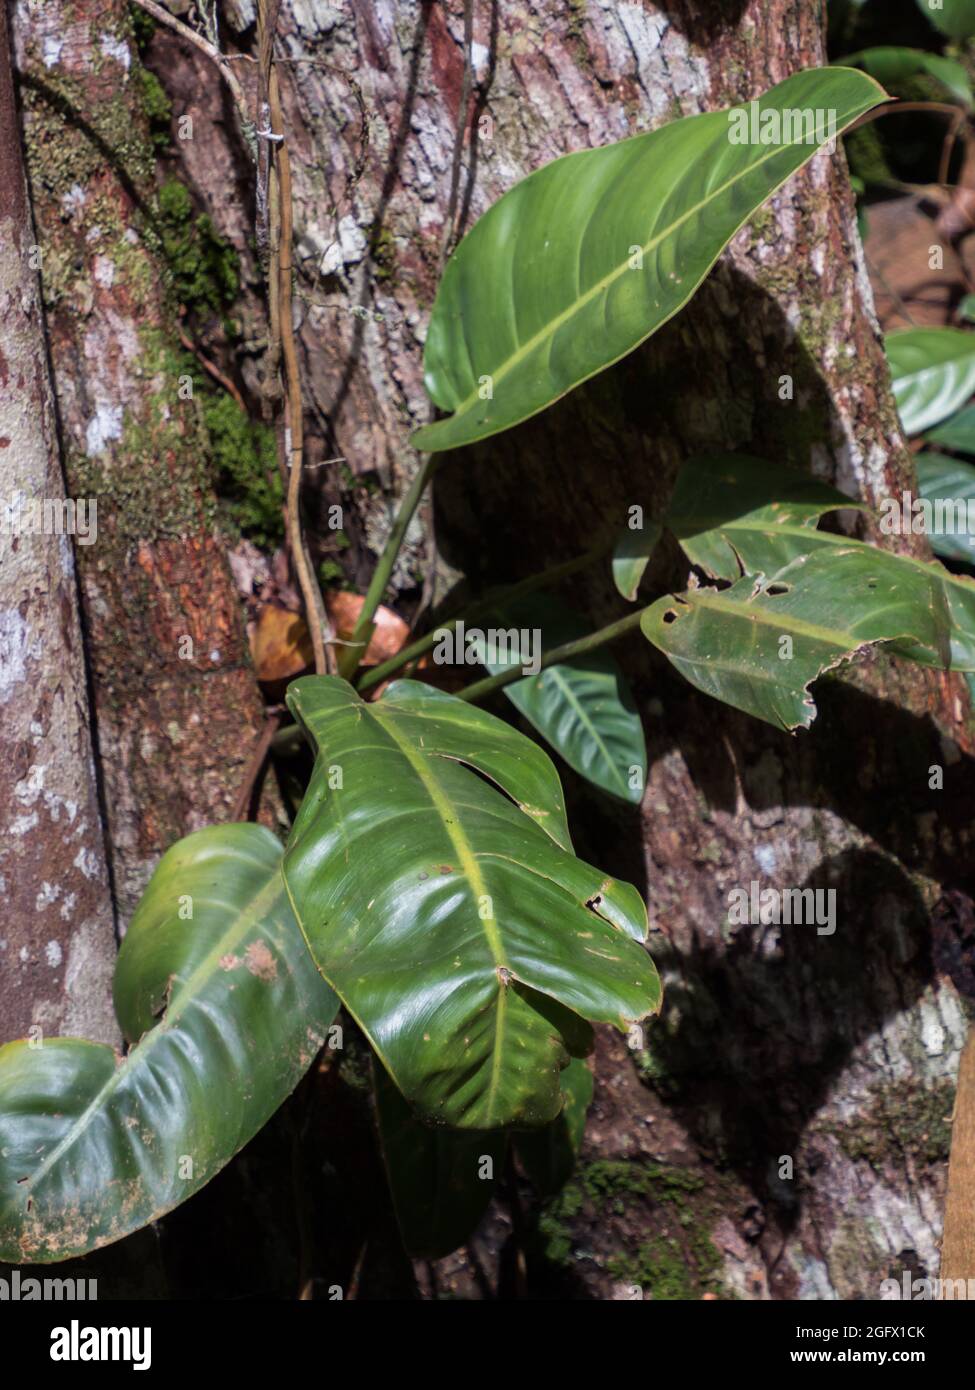 Tree covered with bromeliad found in the Amazon jungle. Bromeliads are plants that are adapted to different climates. Amazonia. Brazil, South America. Stock Photo